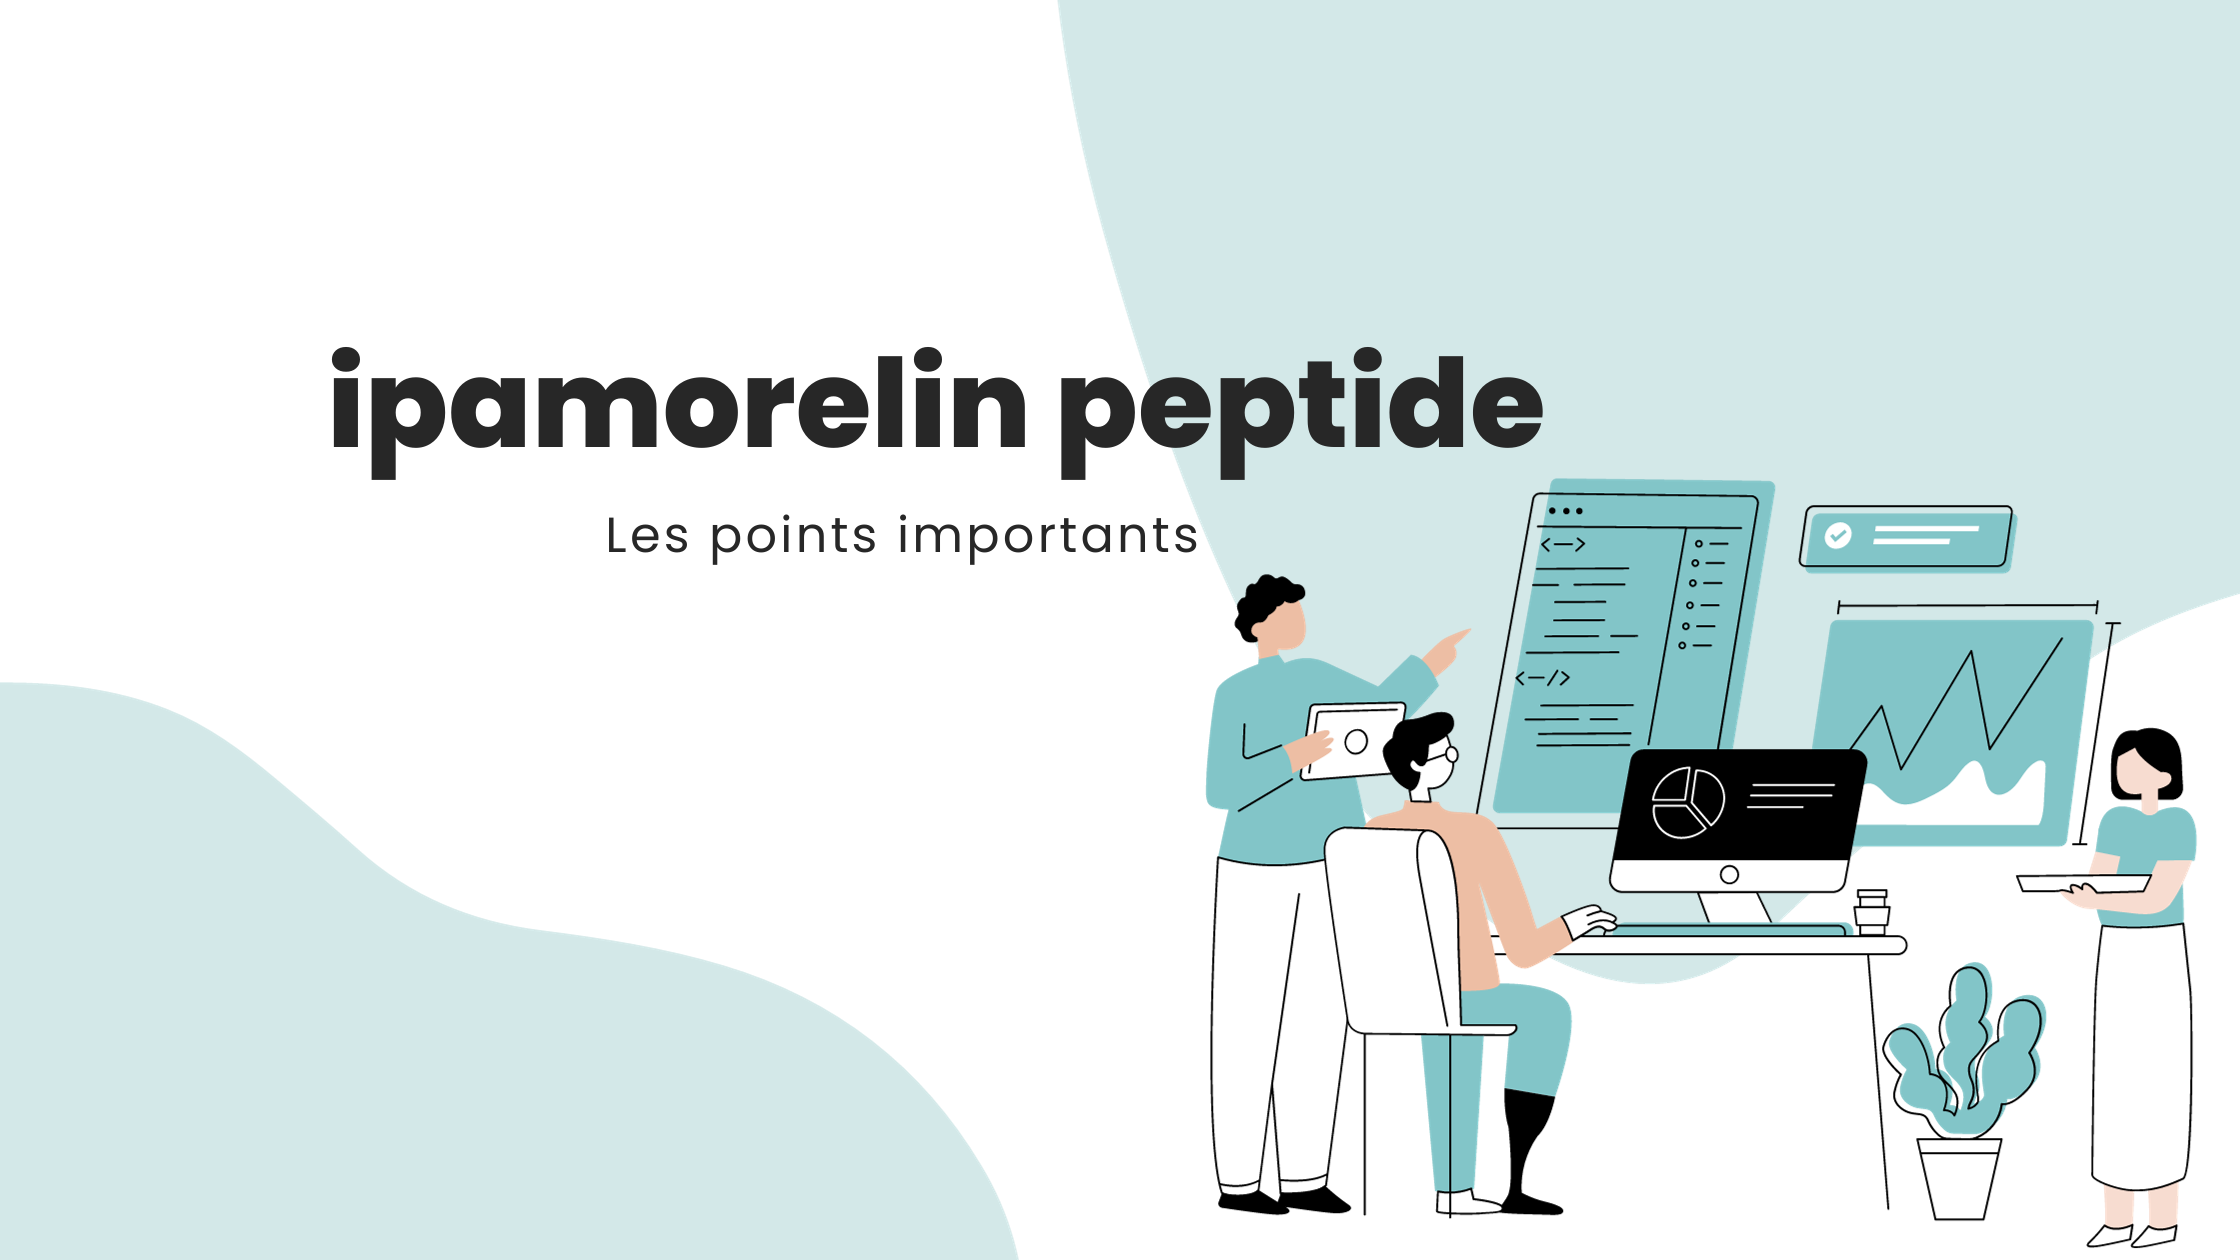 ipamorelin peptide | Les points importants